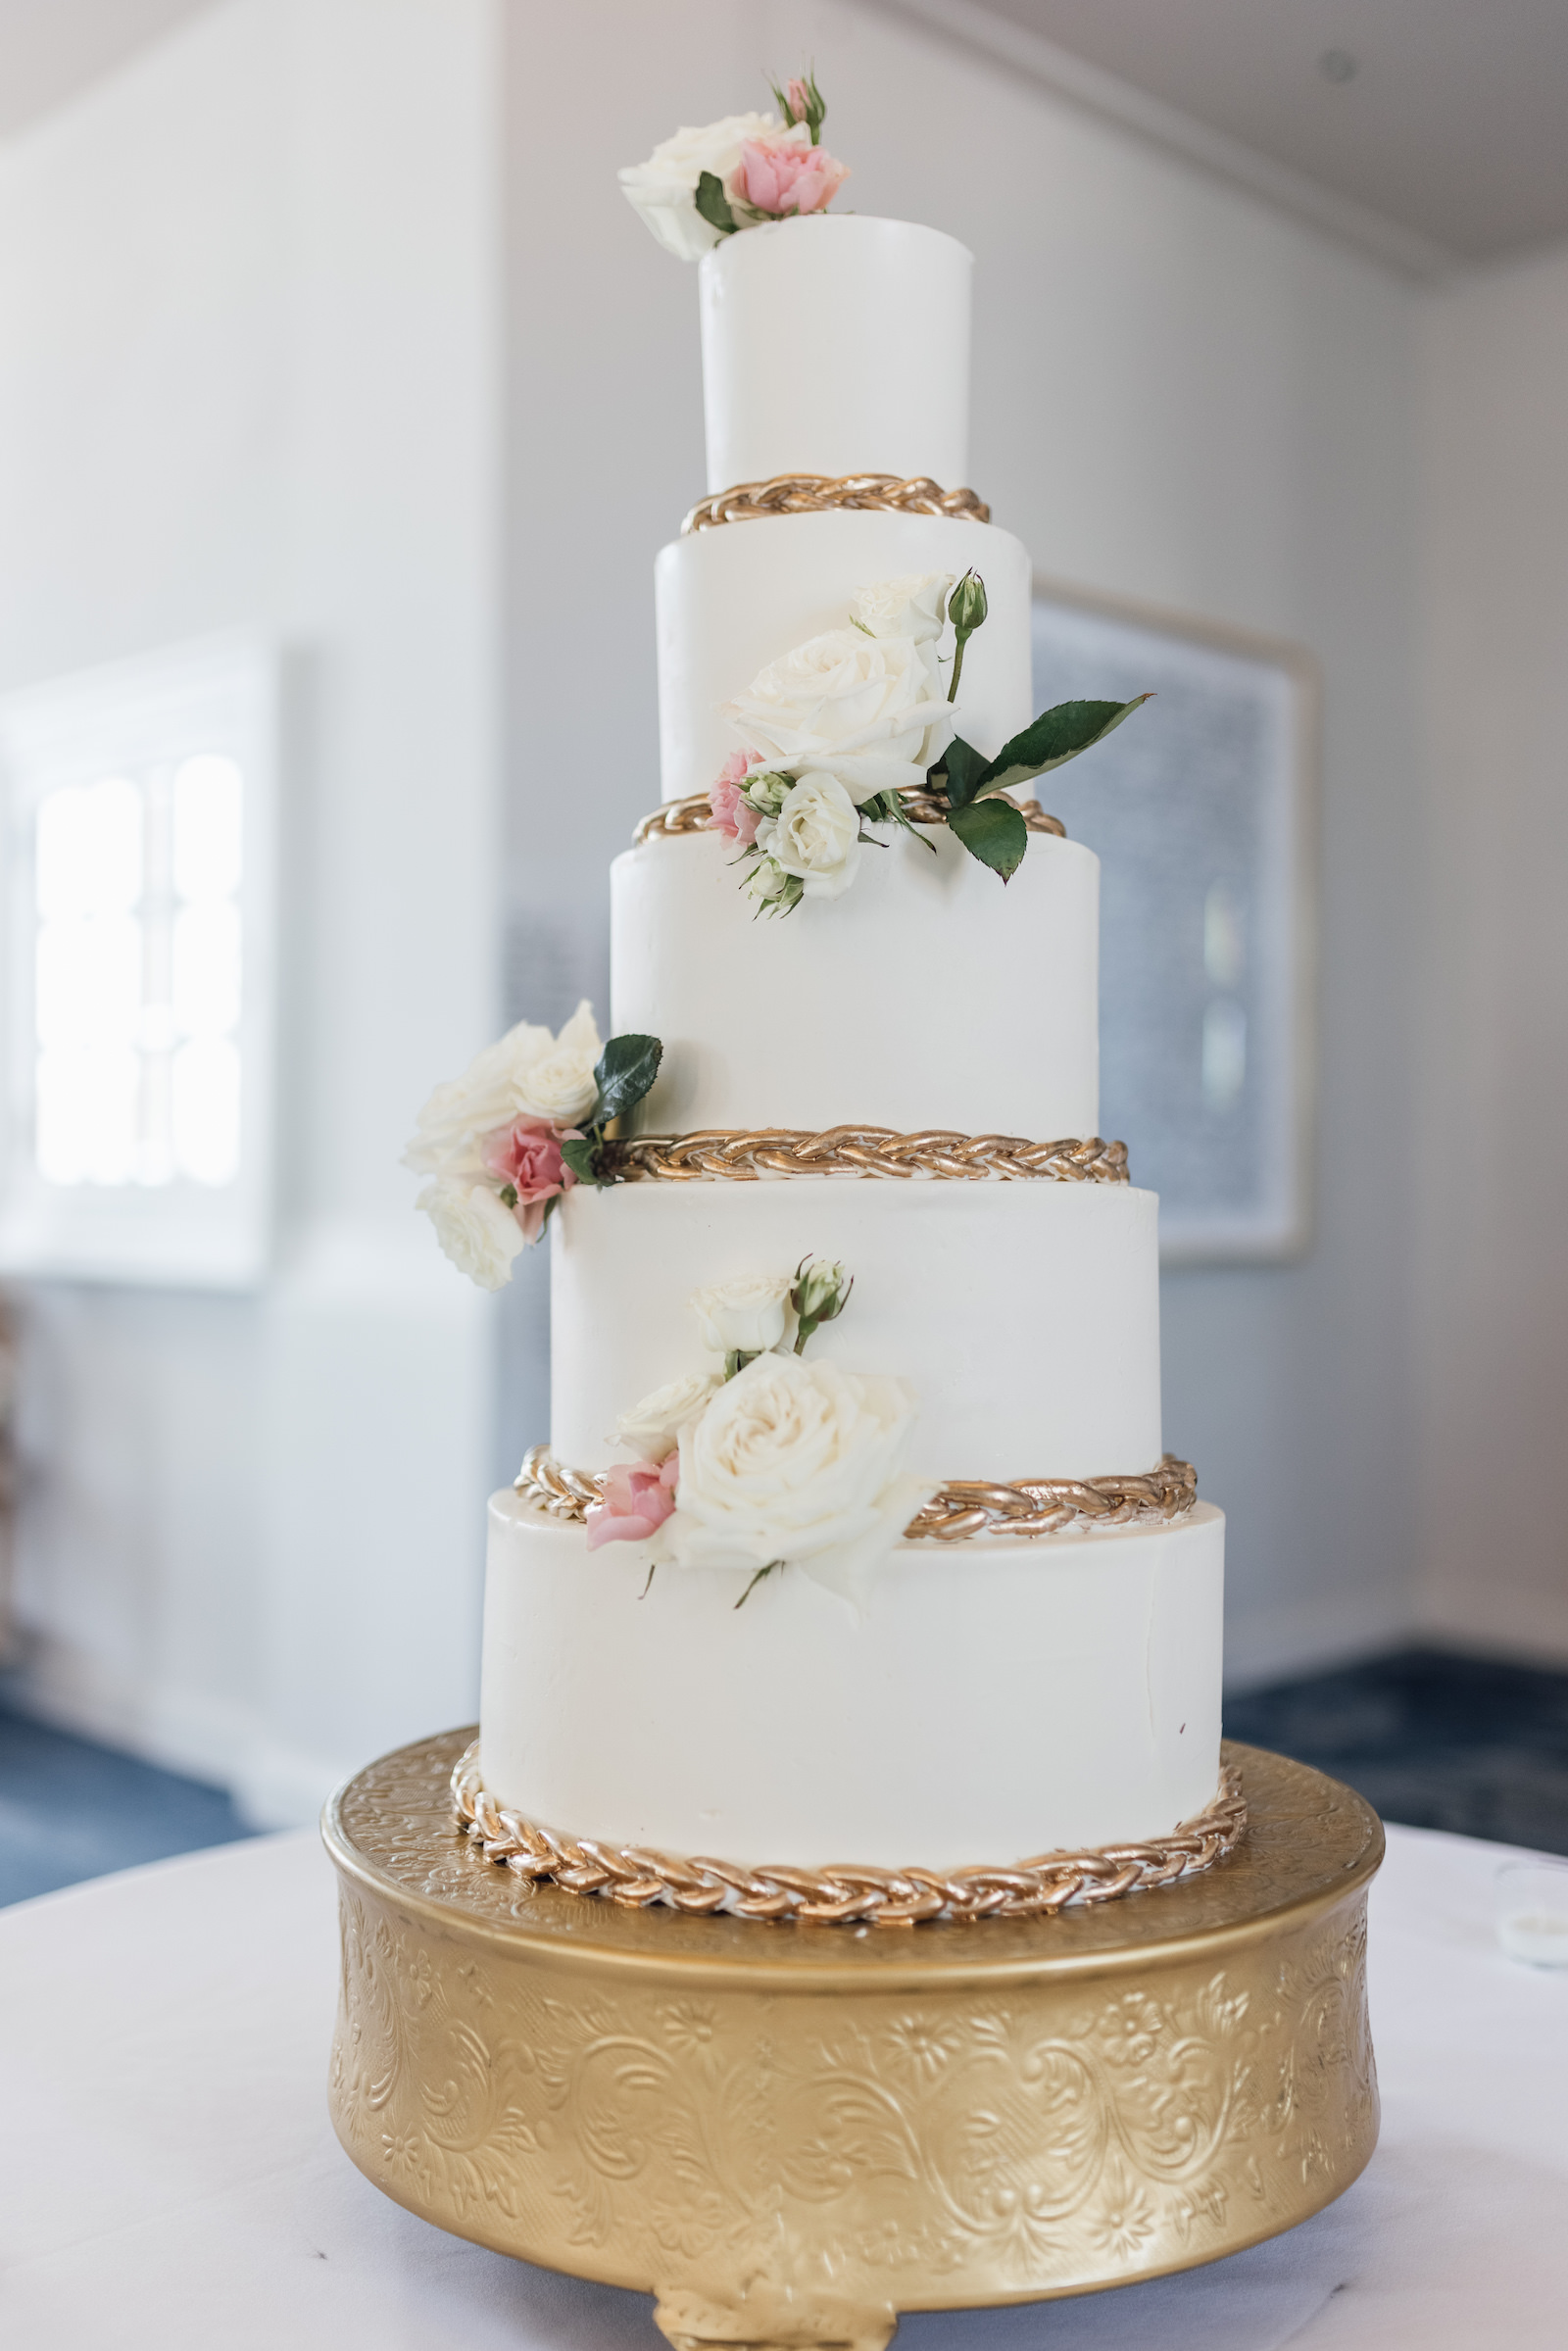 Five Tier White Wedding Cake with Rose Floral Detail, Gold Trim, and Greenery